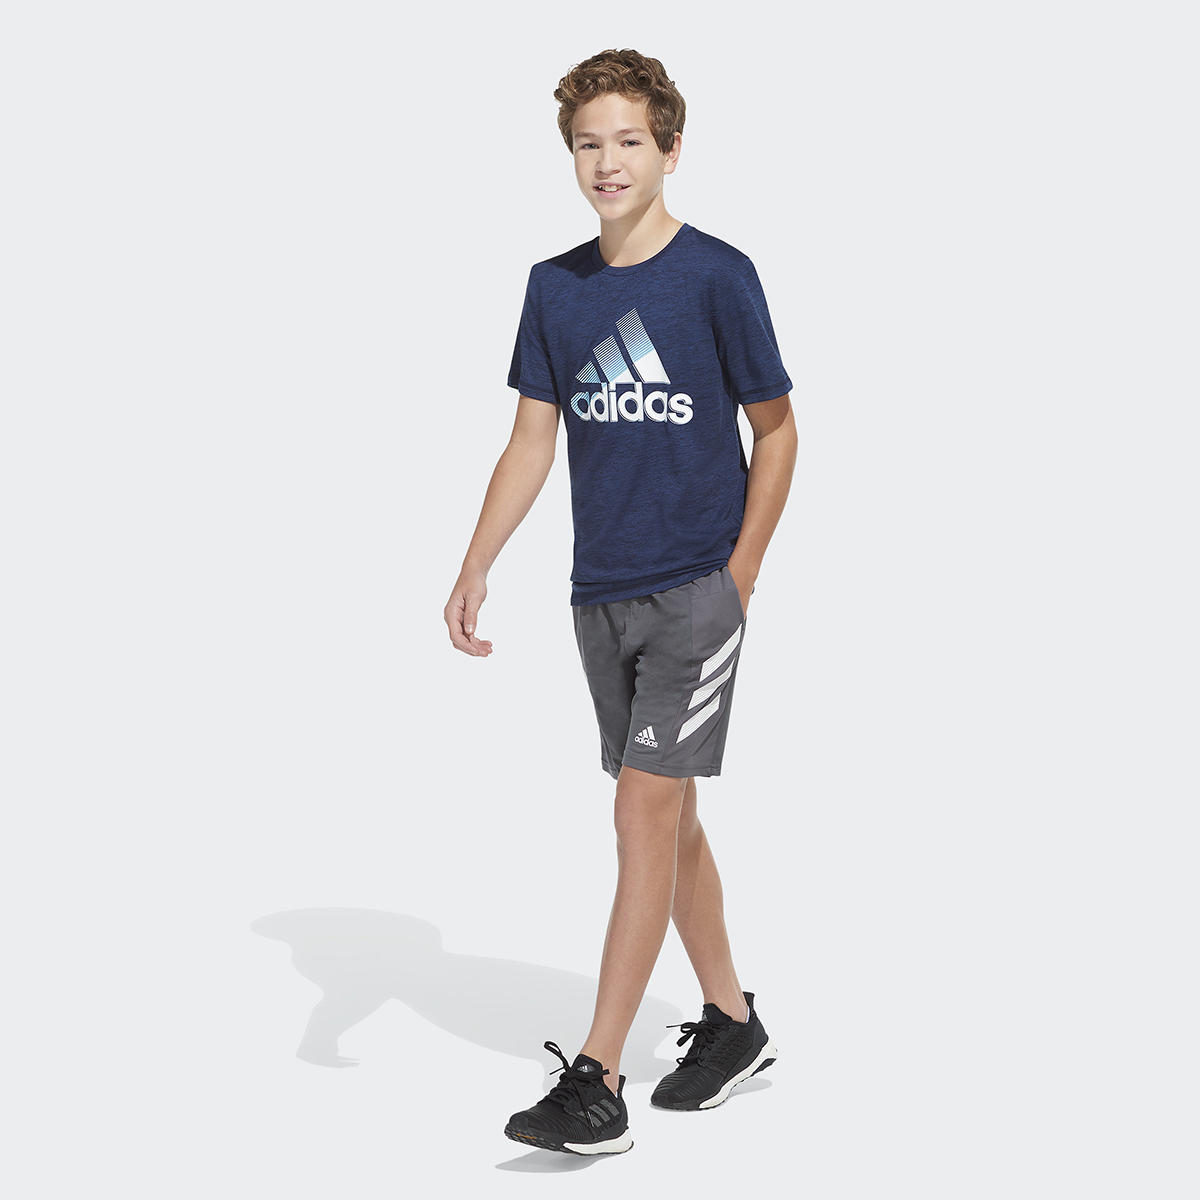 ADIDAS_YOUTH_SPRING21_AA7030_AB02H_2662